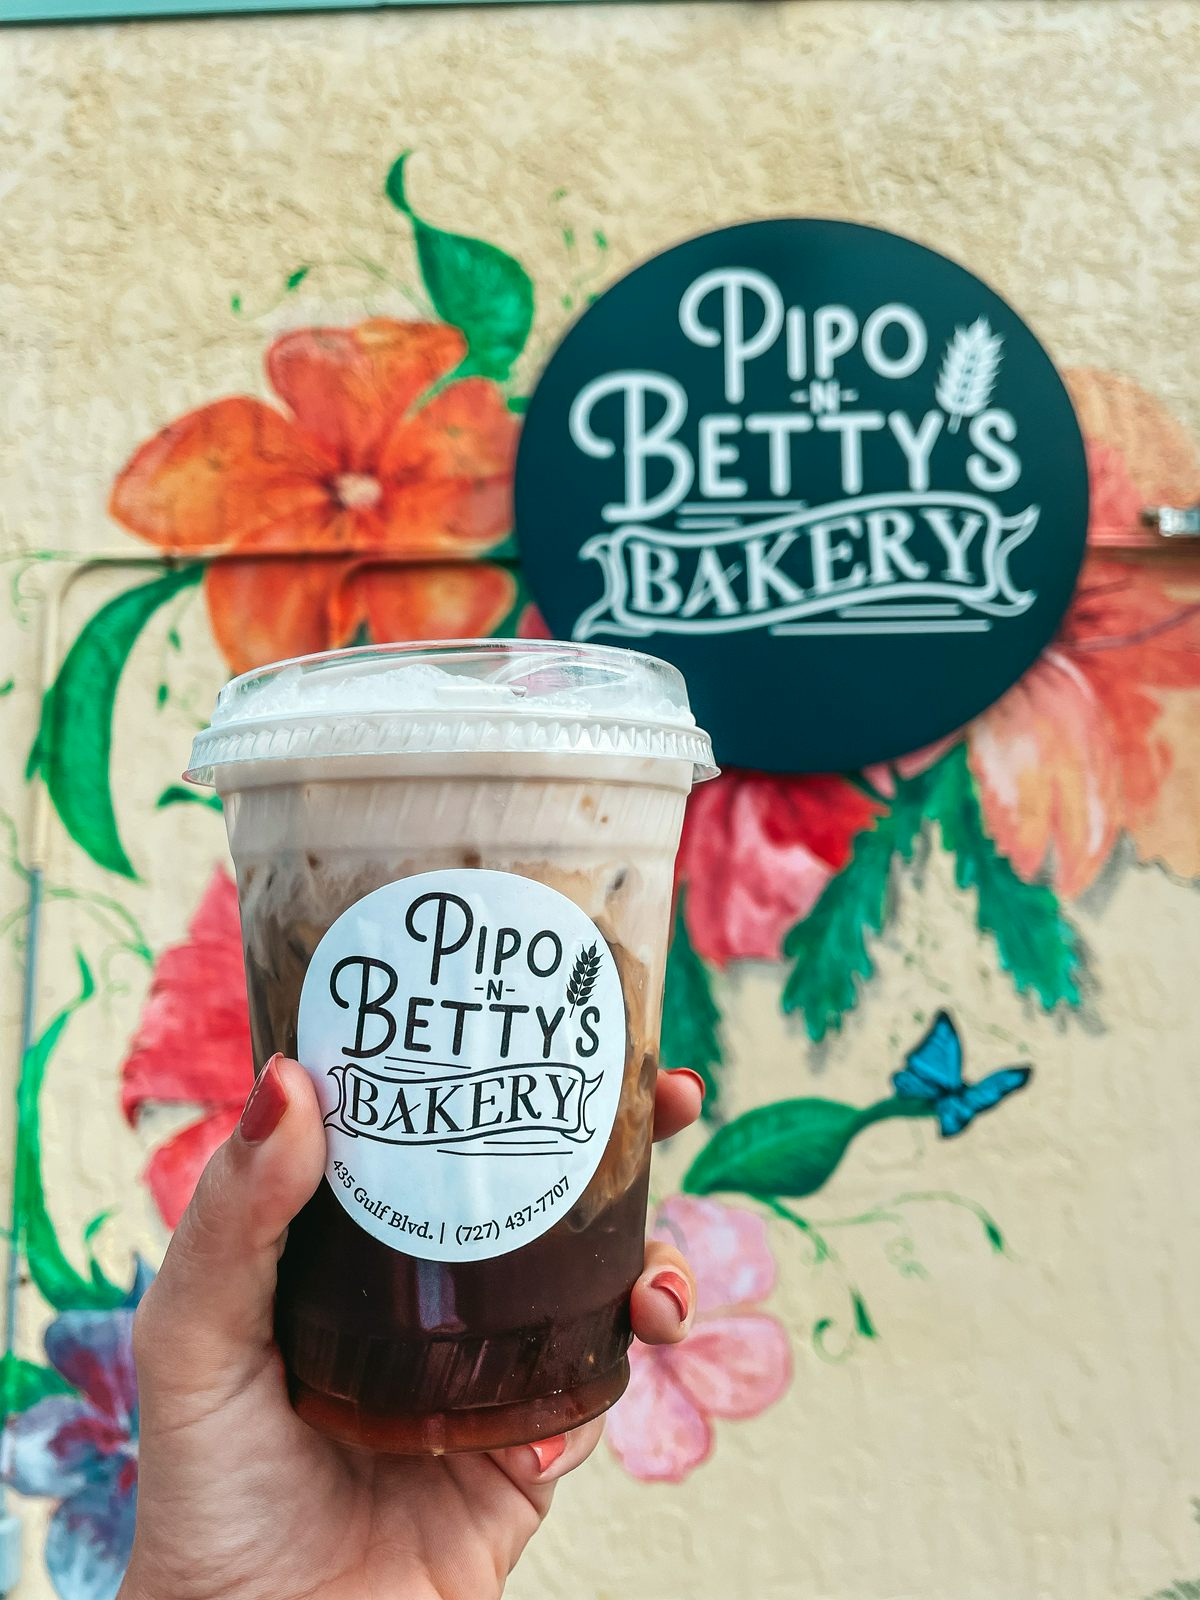 Cold brew coffee from Pipo n Bettys coffee shop in Indian Rocks Beach